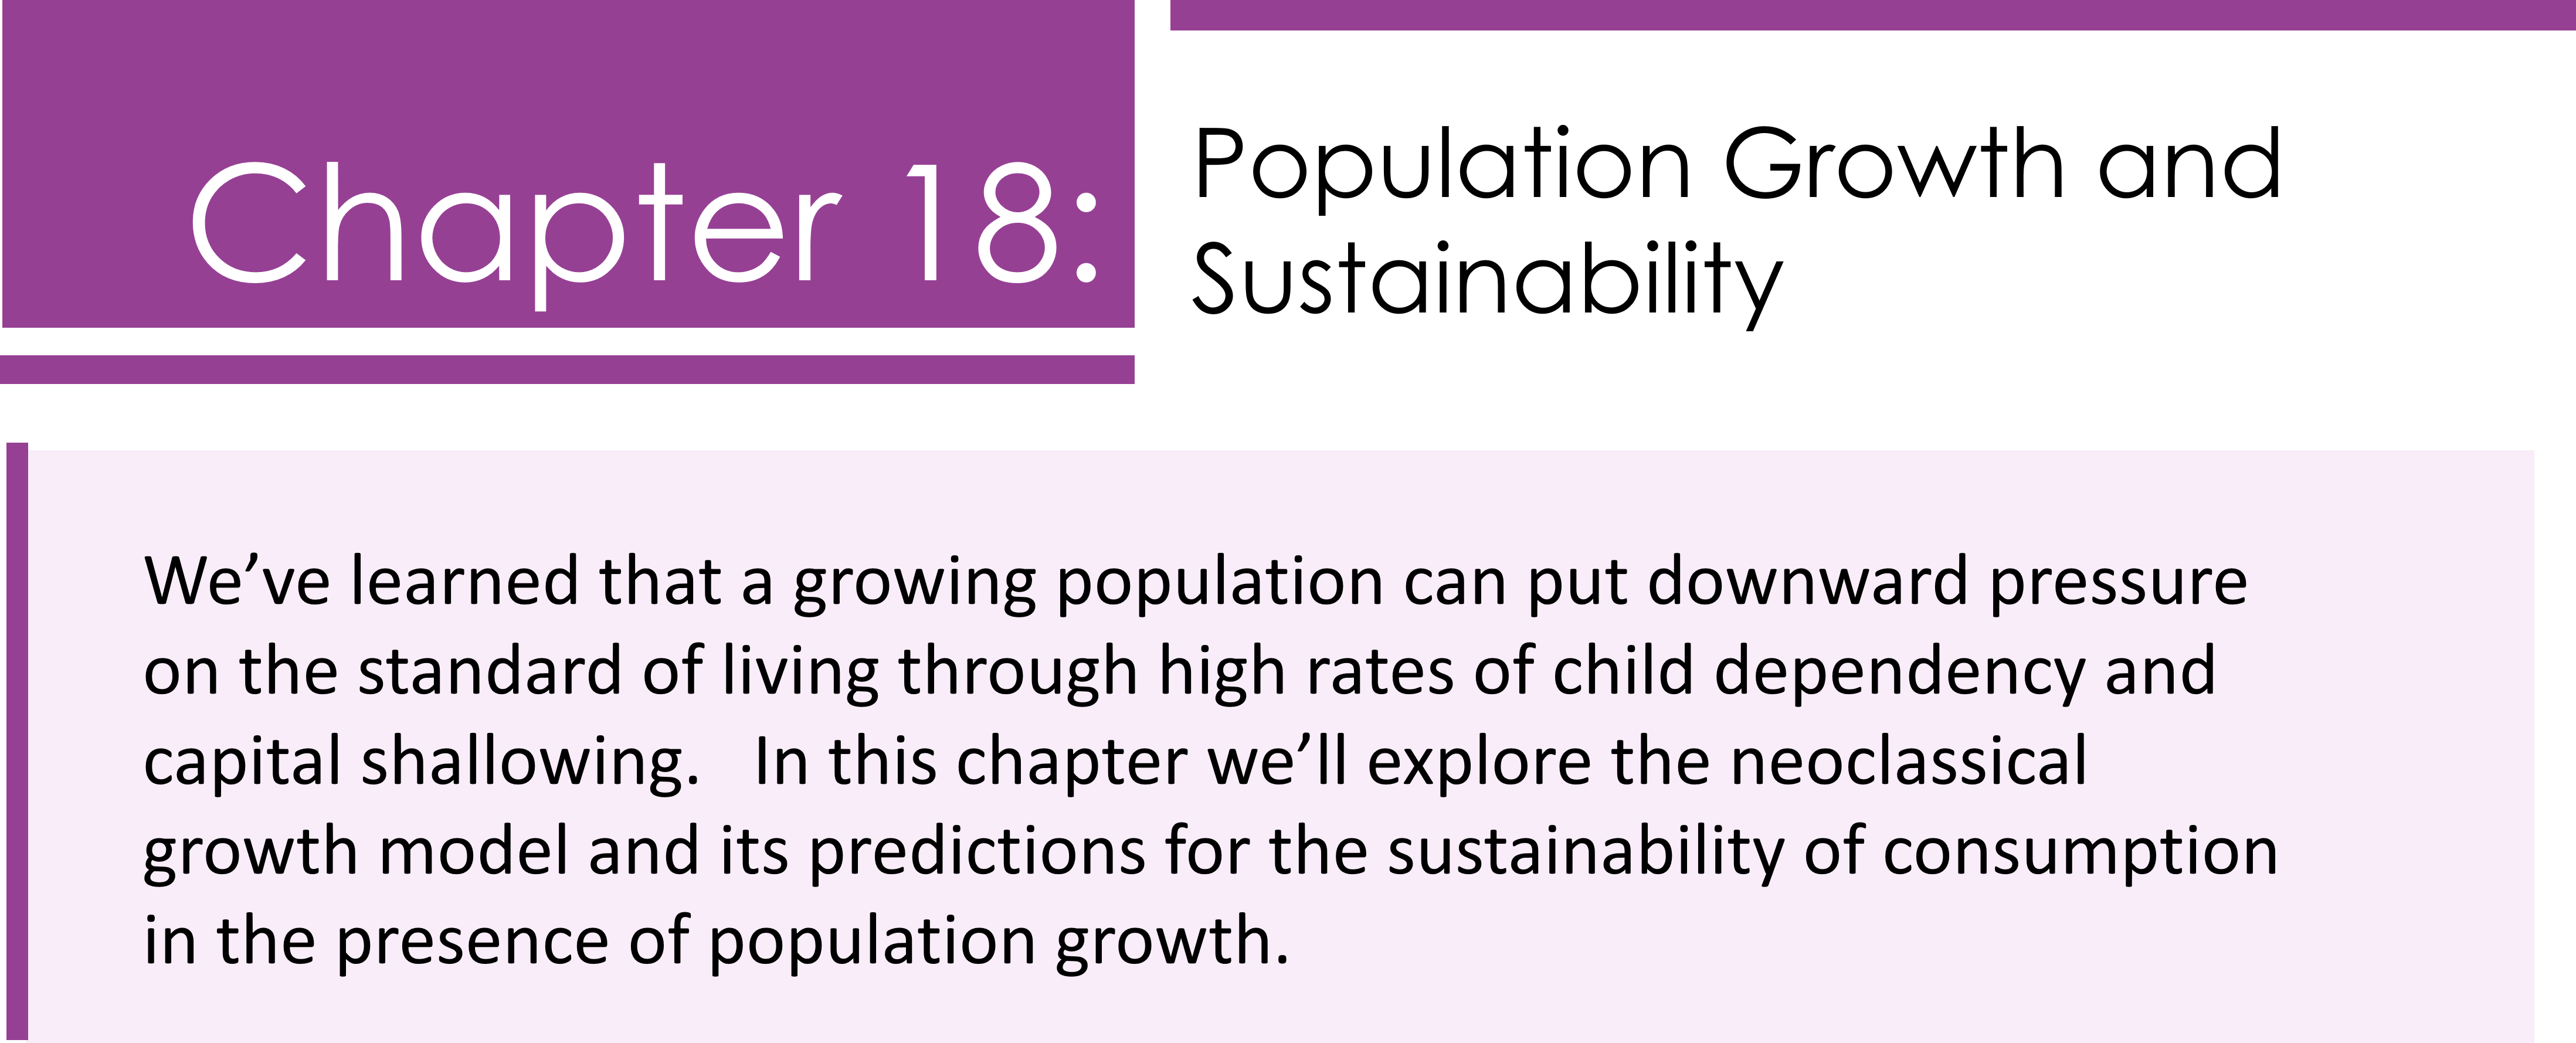 Population Growth and Sustainability. We’ve learned that a growing population can put downward pressure on the standard of living through high rates of child dependency and capital shallowing. In this chapter we’ll explore the neoclassical growth model and its predictions for the sustainability of consumption in the presence of population growth.